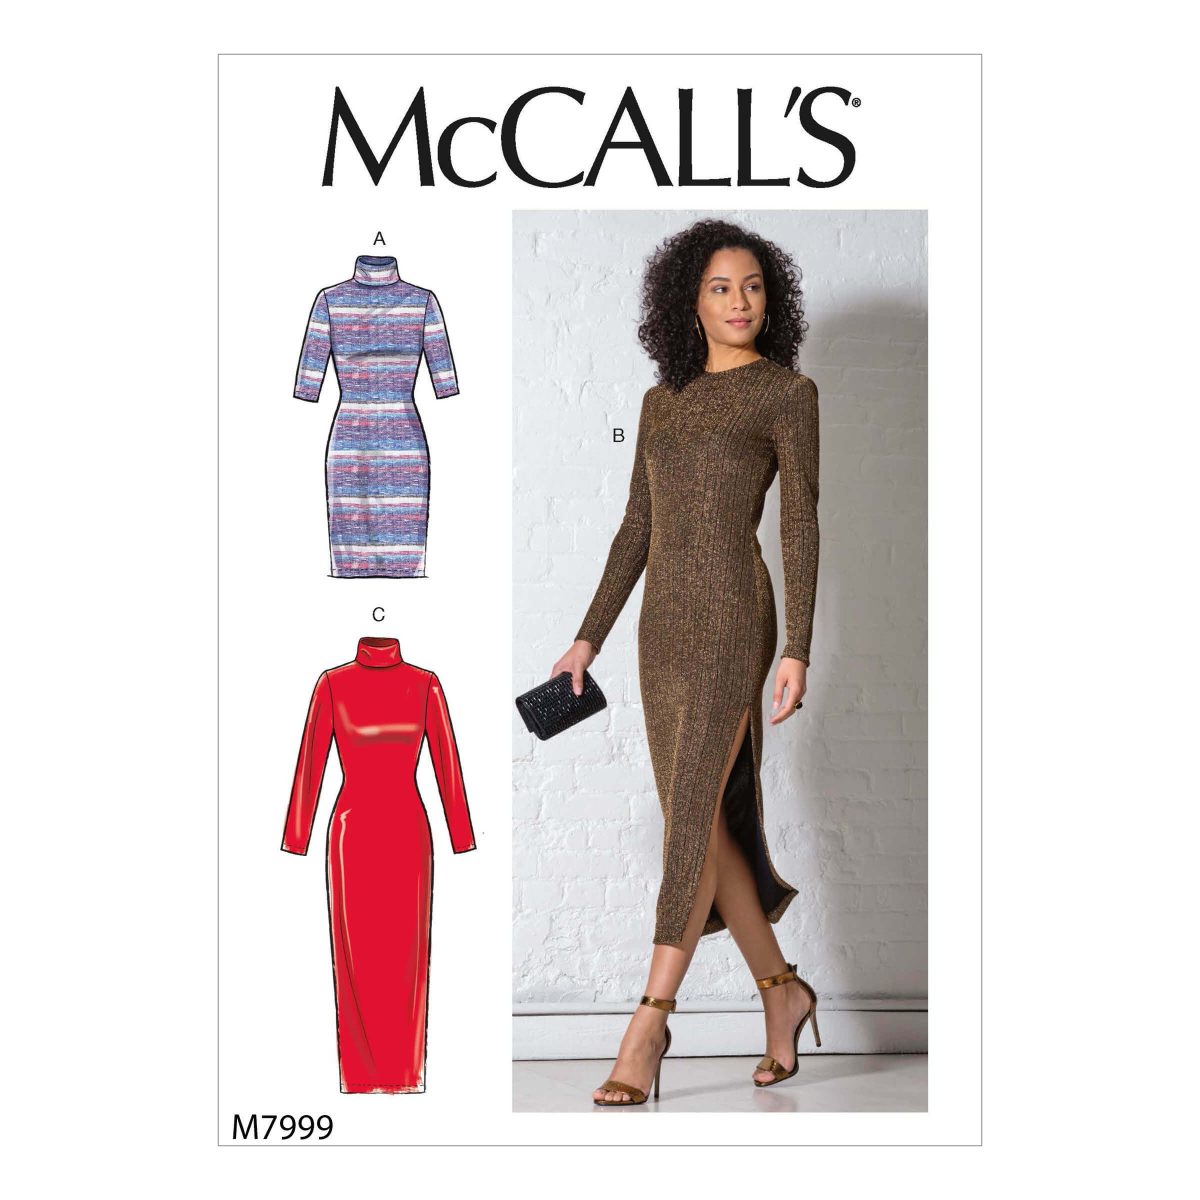 McCall's Sewing Pattern M7999 Misses' Dresses